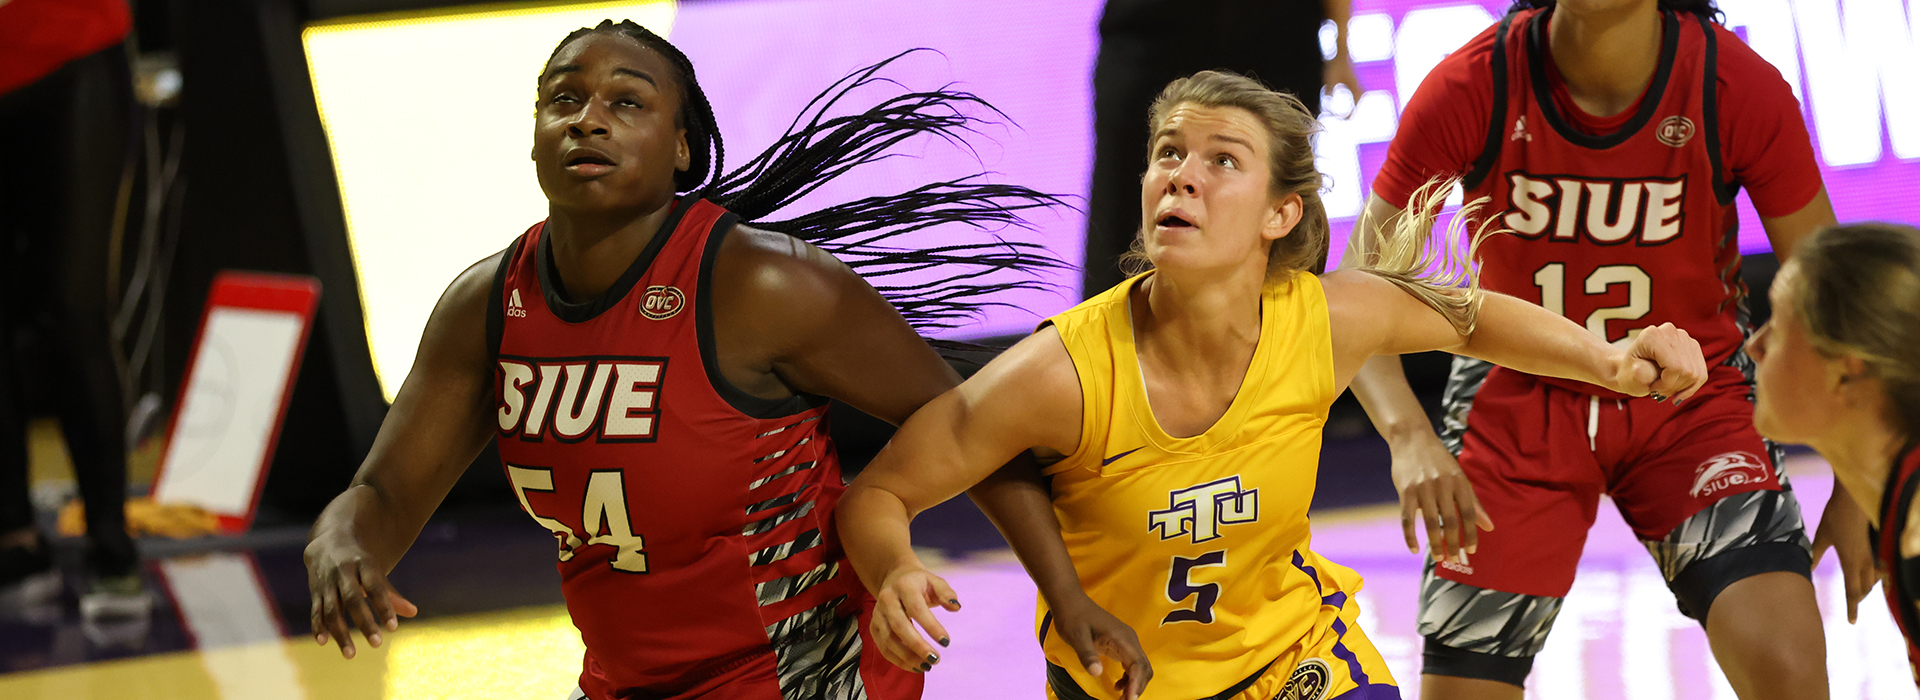 Tech women to take on SMU in first round of WNIT